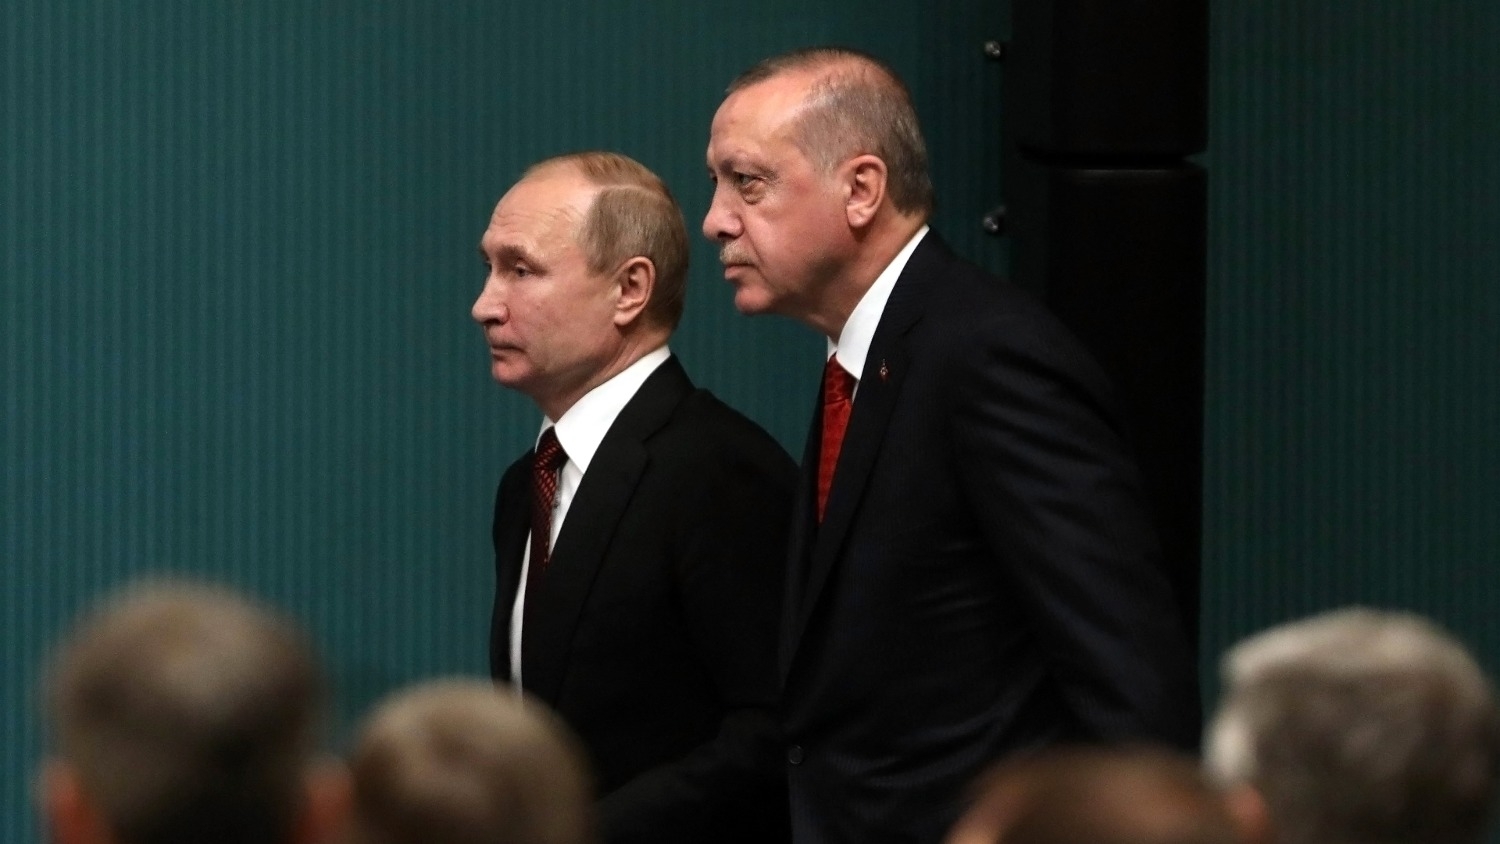 Russian President Vladimir Putin and Turkish President Recep Tayyip Erdogan arrive to hold a joint press conference at the Presidential Complex in Ankara on 3 April 2018.